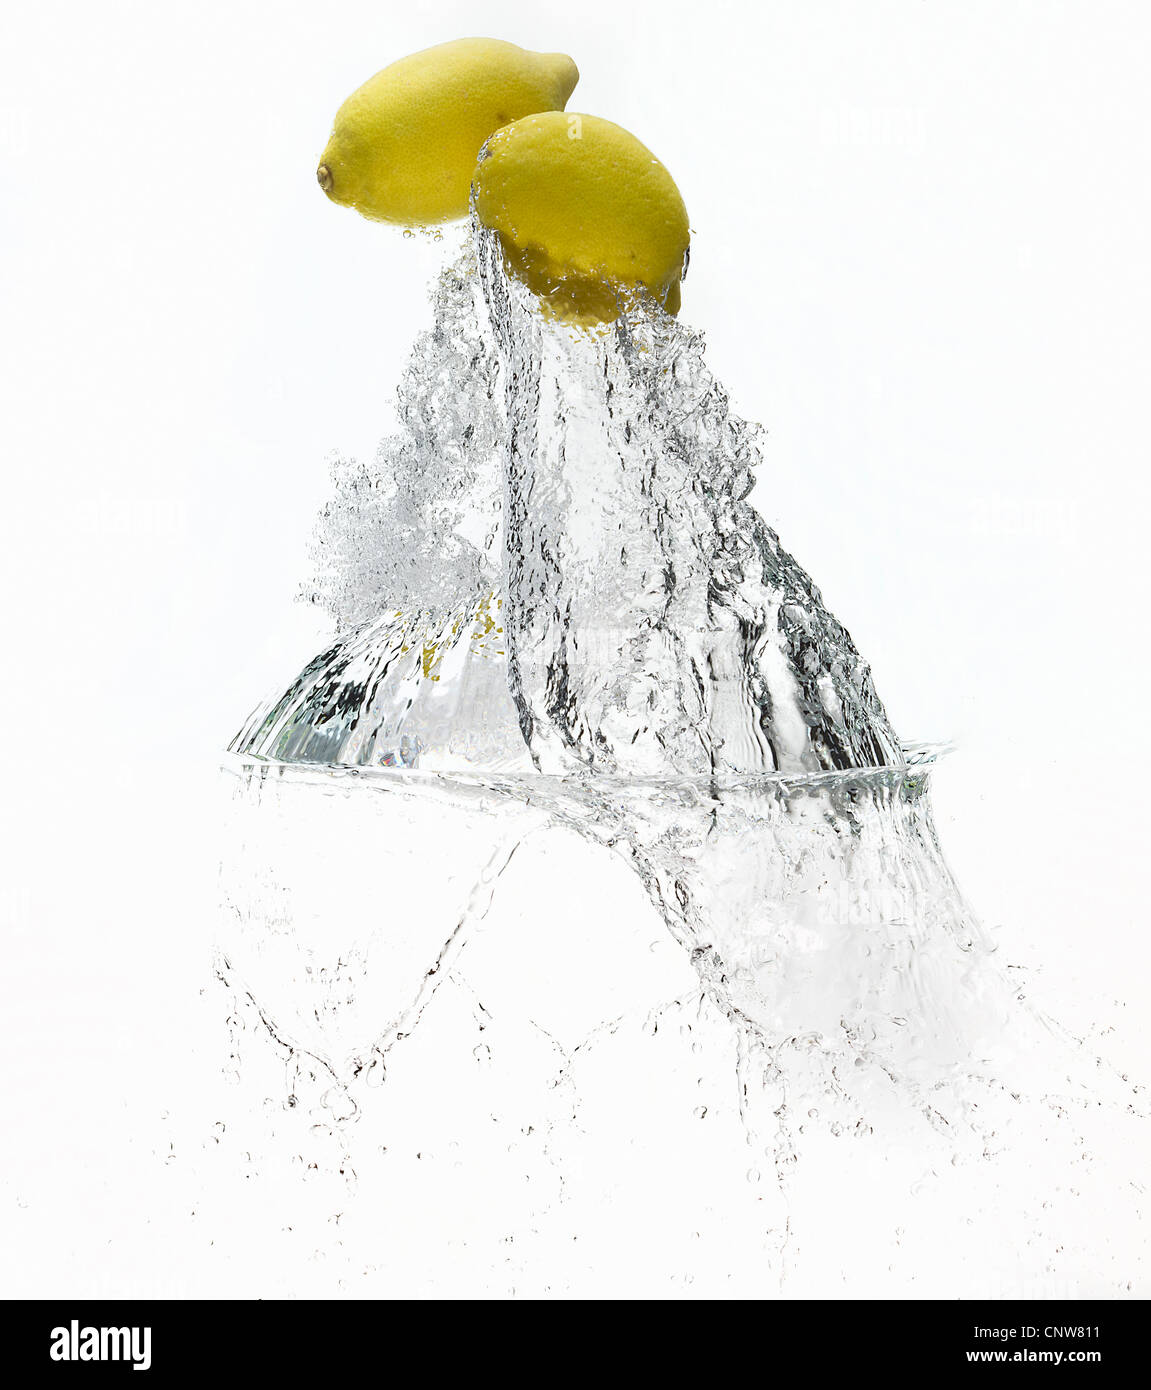 Citrons splashing in water Banque D'Images